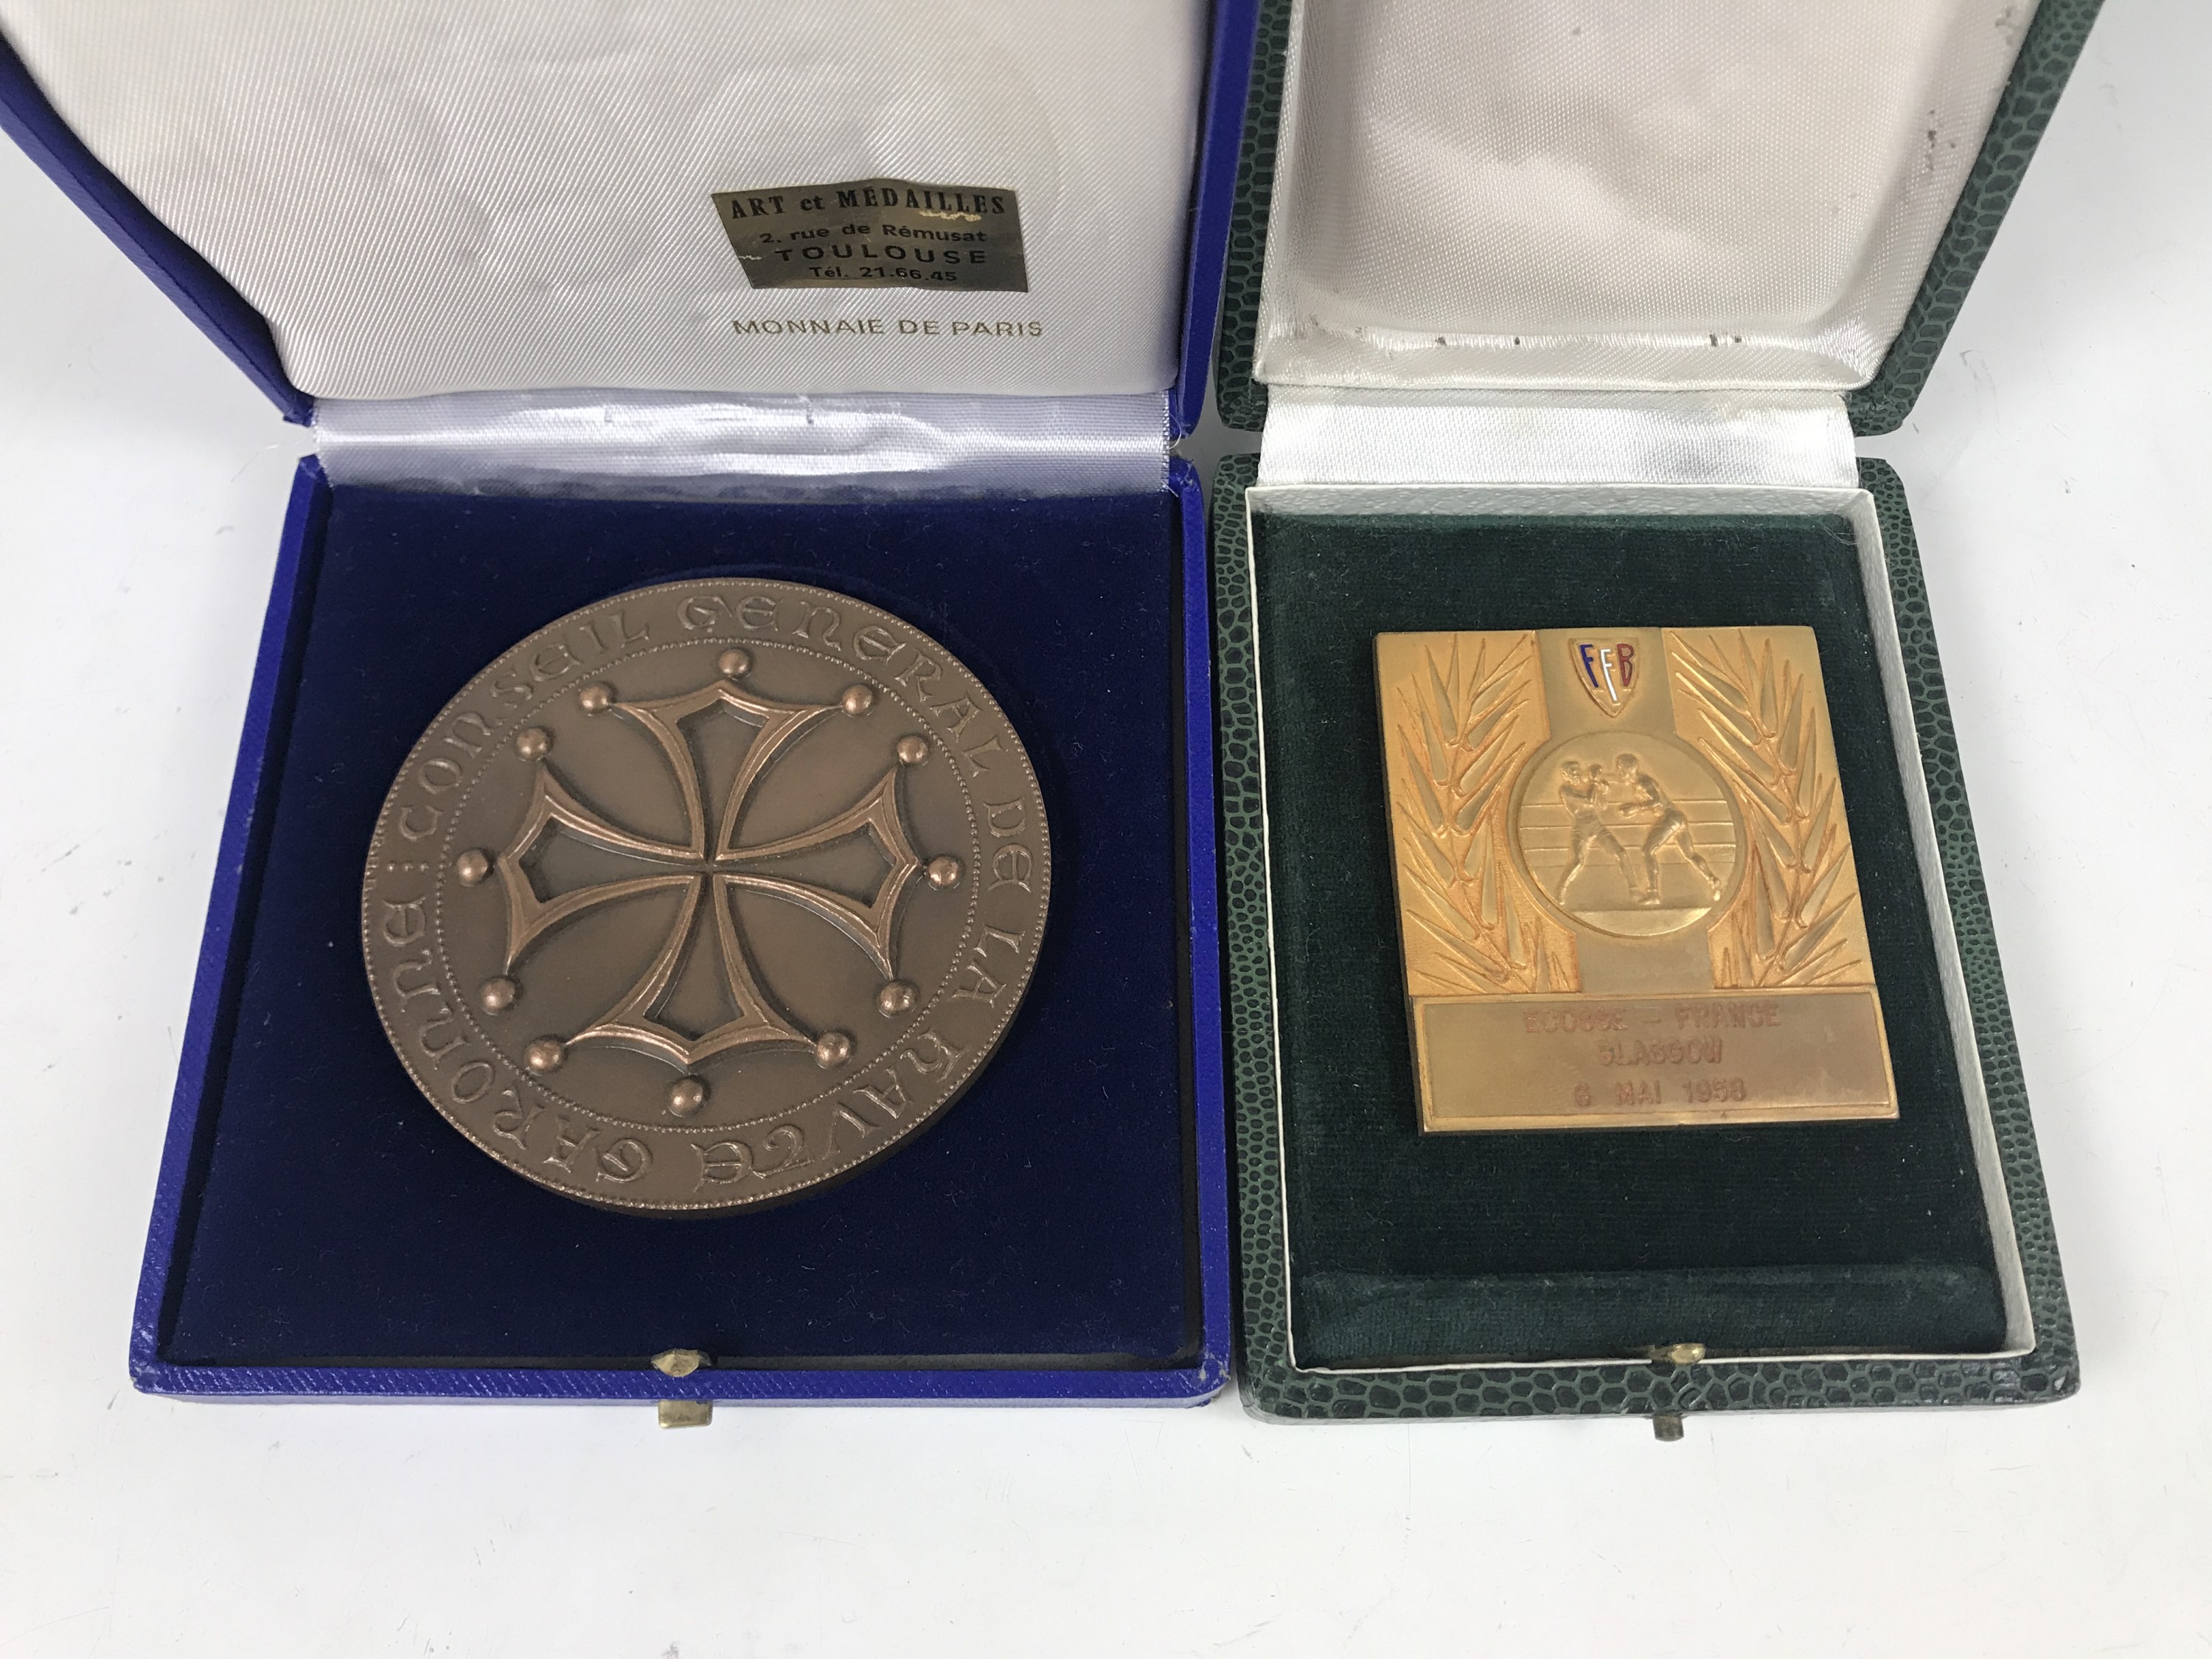 A large reproduction bronze Conseil General de la Havre Garonne medal dated 1978 together with a